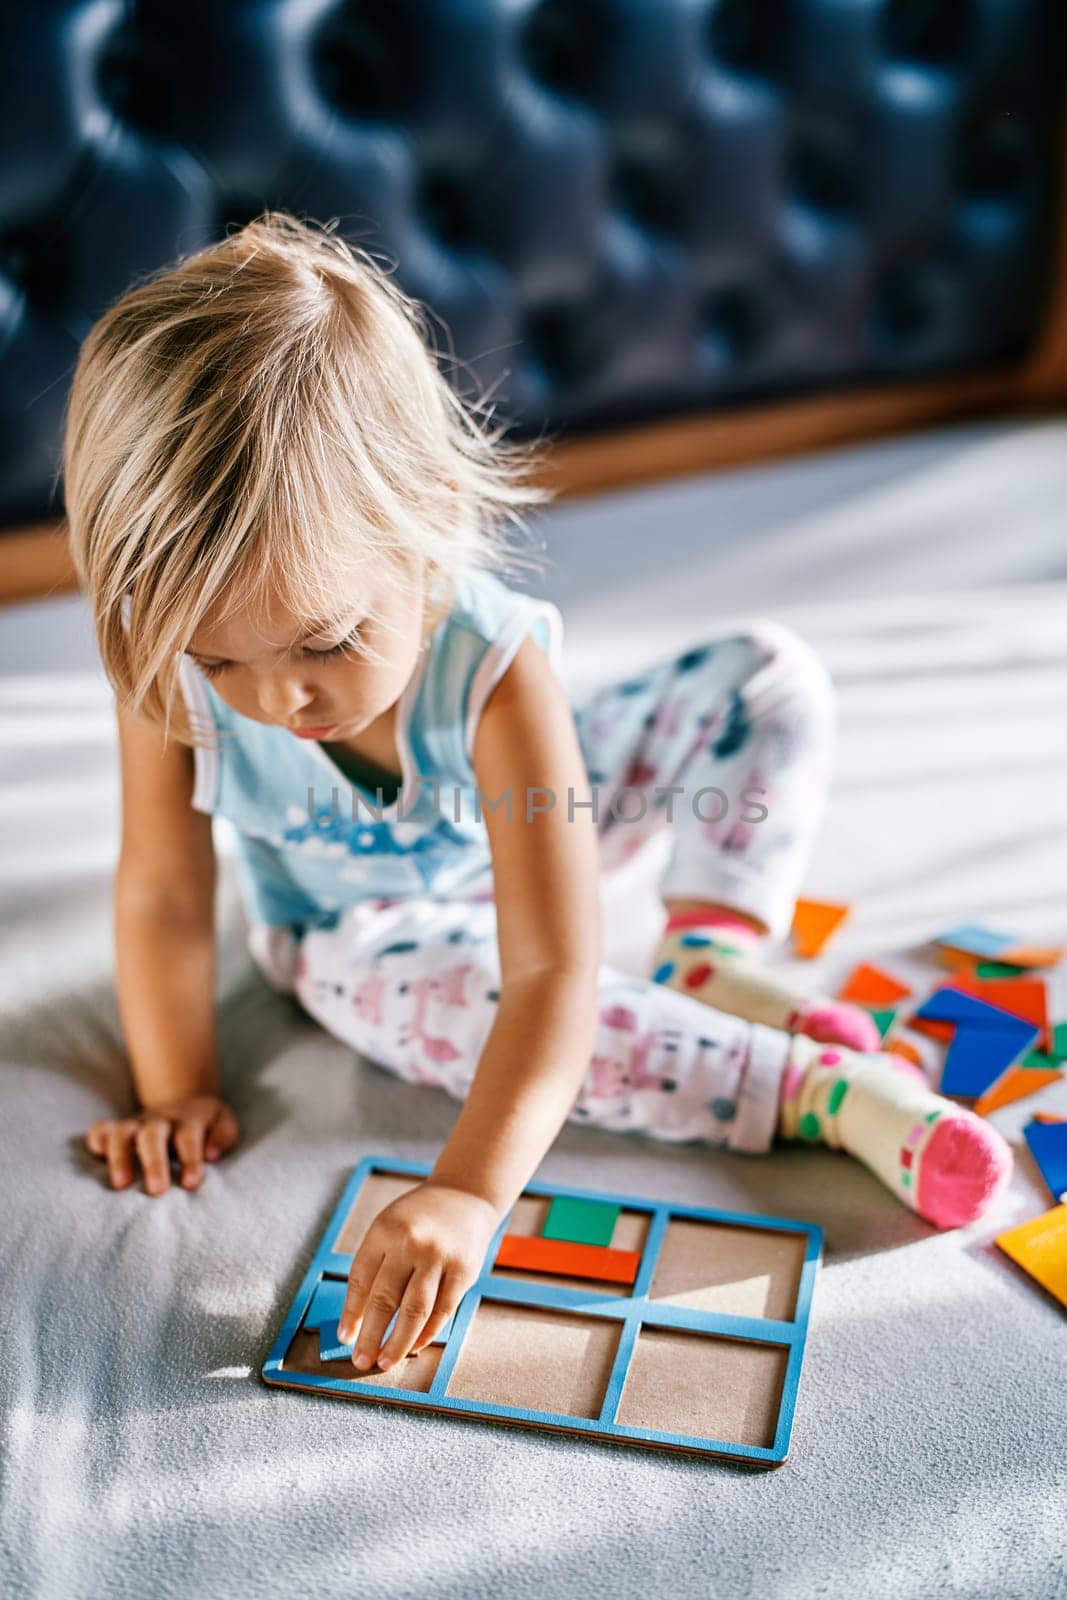 Little girl sits on the bed and puts together a puzzle by Nadtochiy